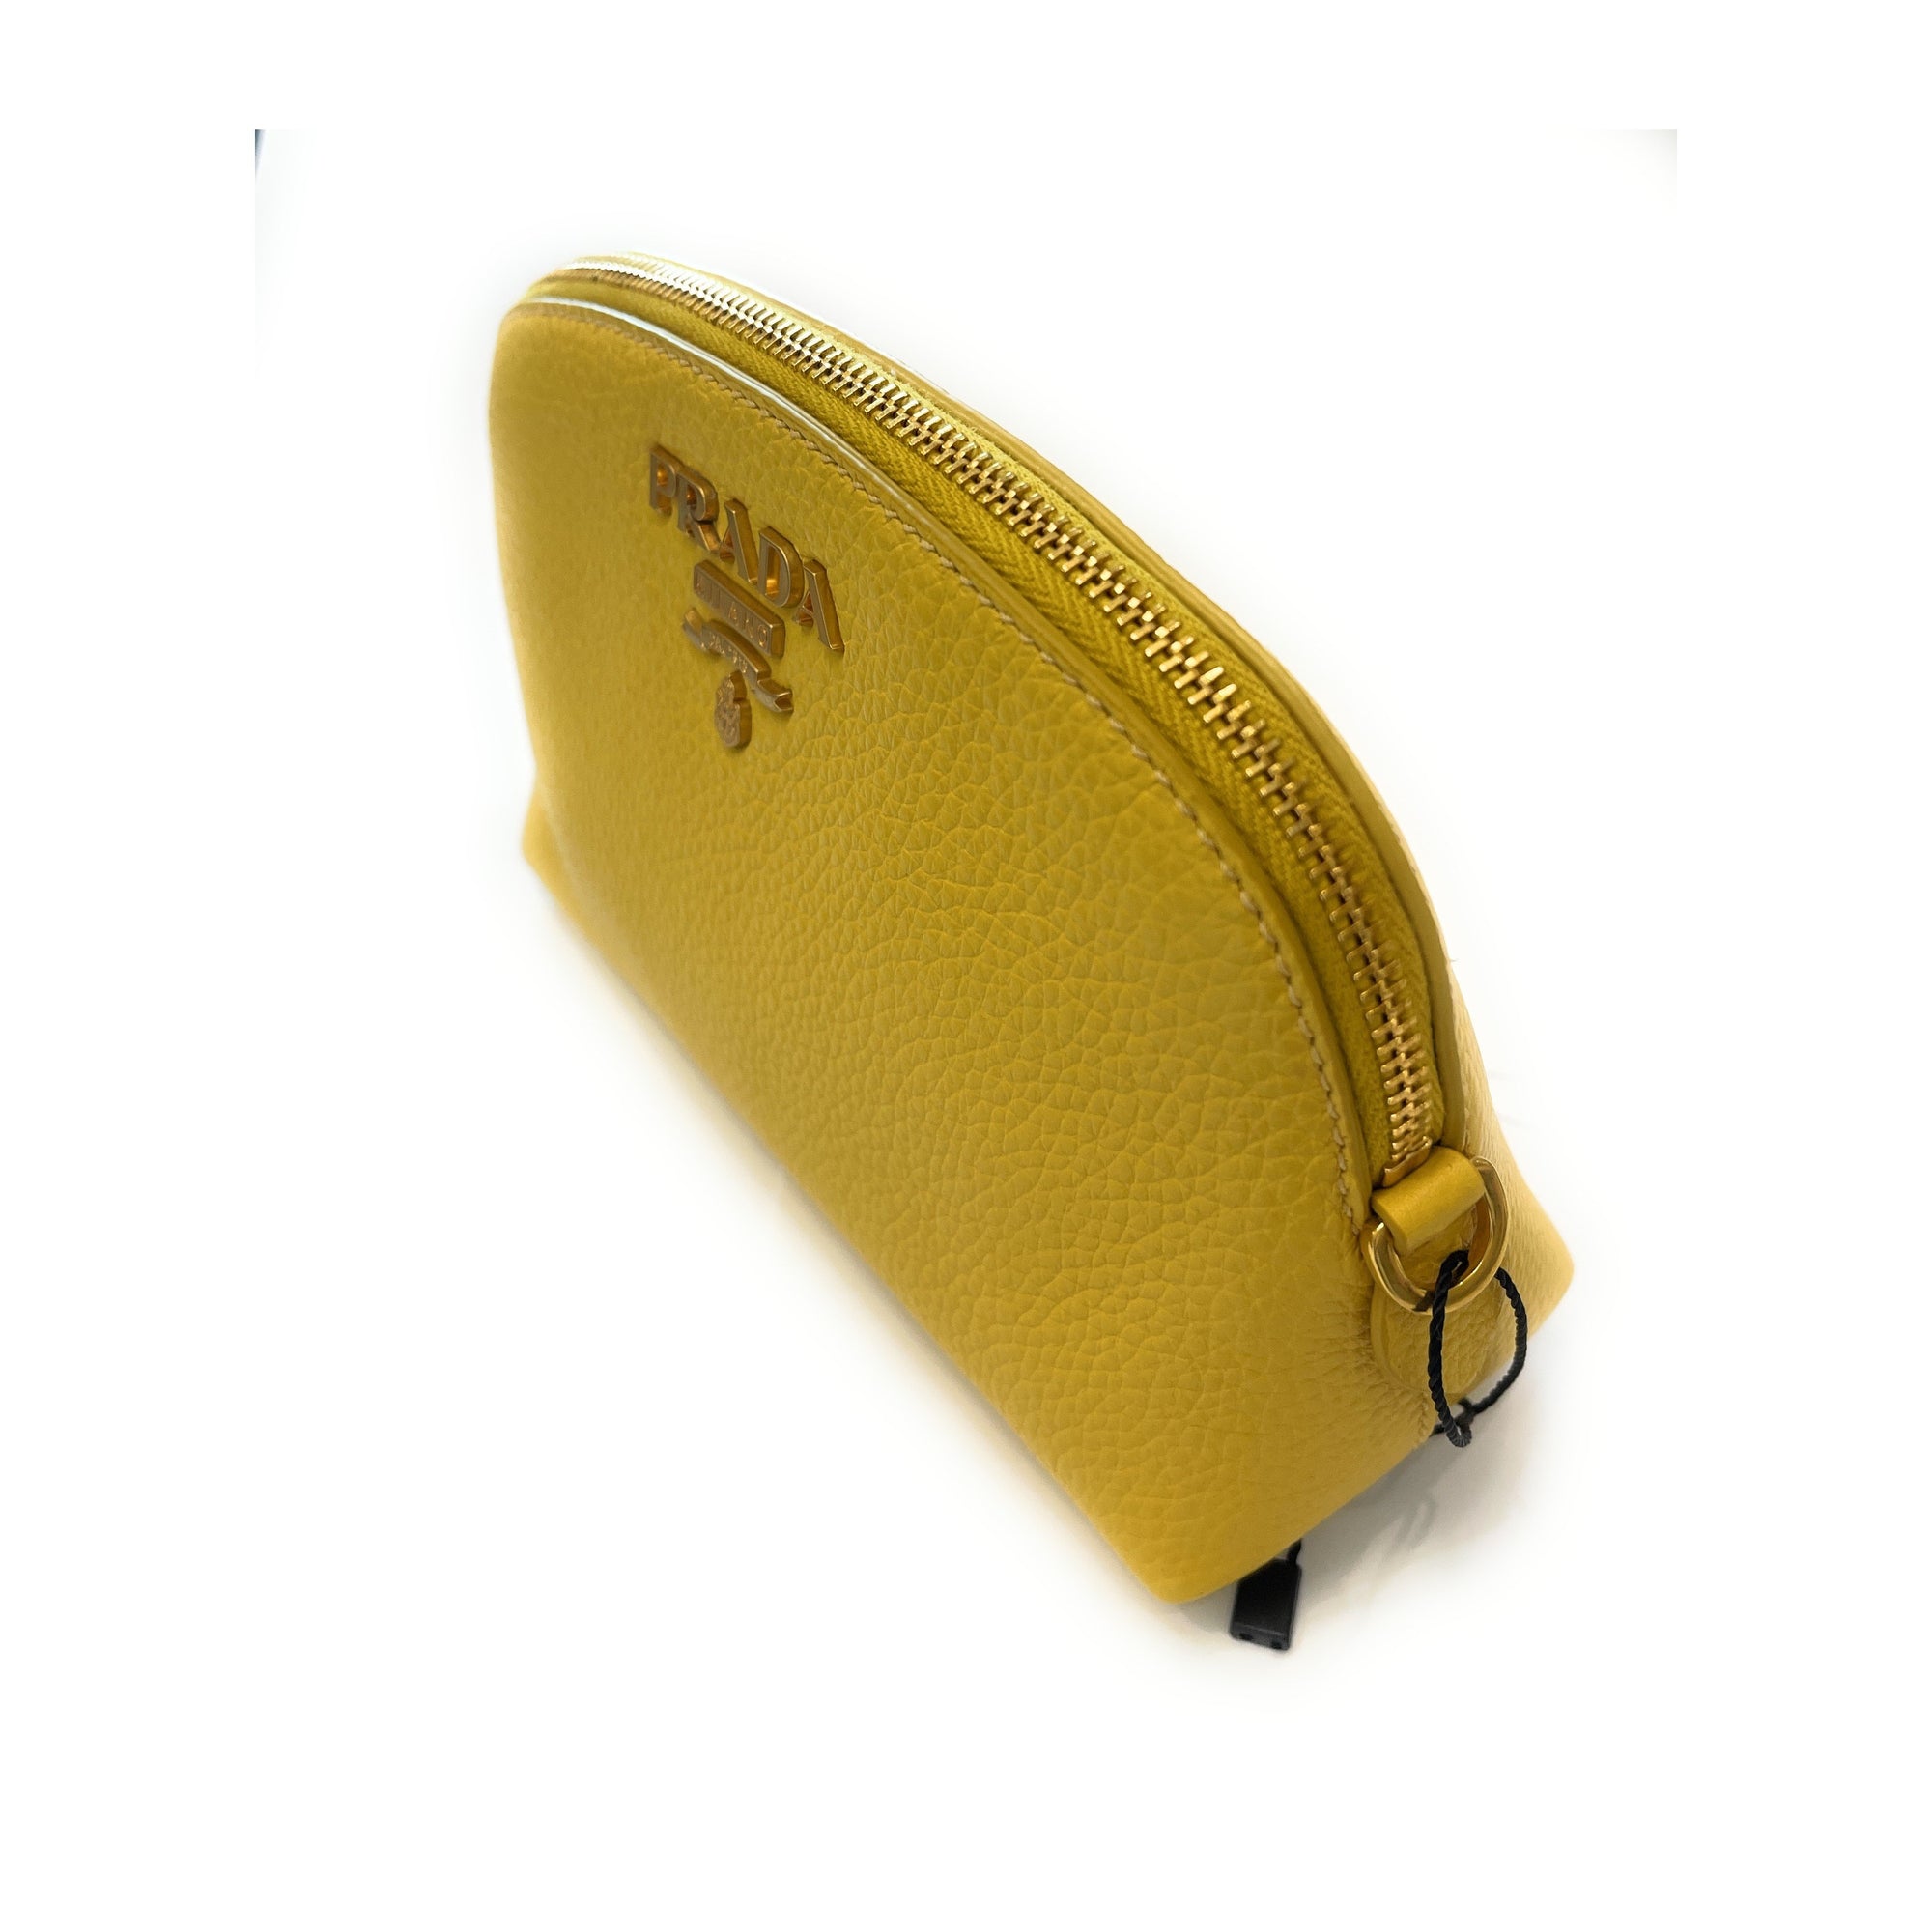 Prada Contenitore Yellow Vitello Daino Pouch Vanity Cosmetic Case 1ND005 at_Queen_Bee_of_Beverly_Hills